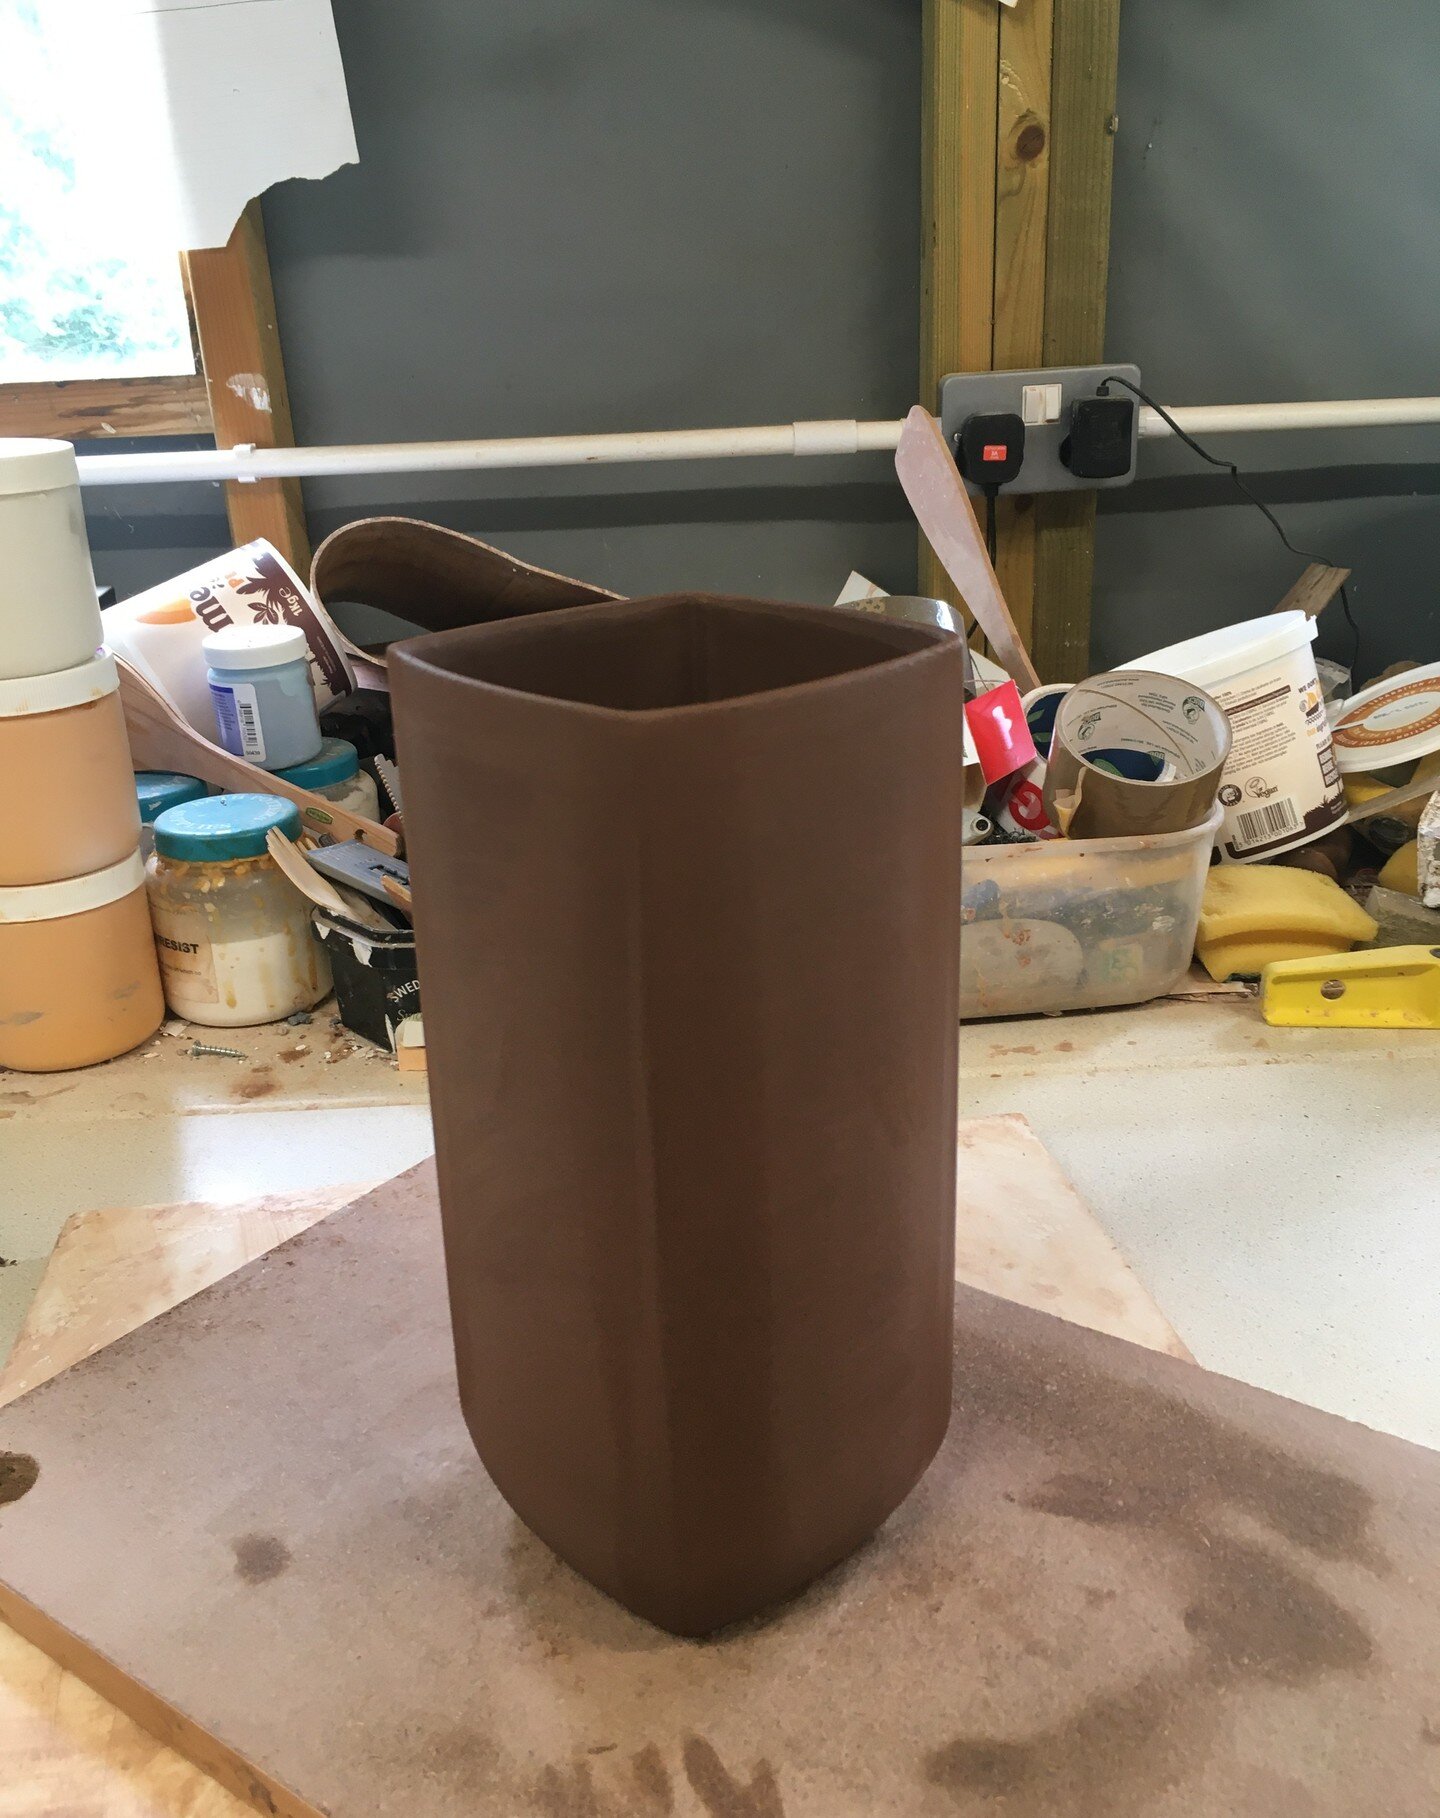 New prototype! Tall jug/vase. I'm really liking these! I hope to have them available for retail in a few weeks.

https://linktr.ee/Dennisblatchley.ceramics

#MAKEsouthwest #findamakermember #findamaker #contemporaryceramics #contemporarytableware #ce